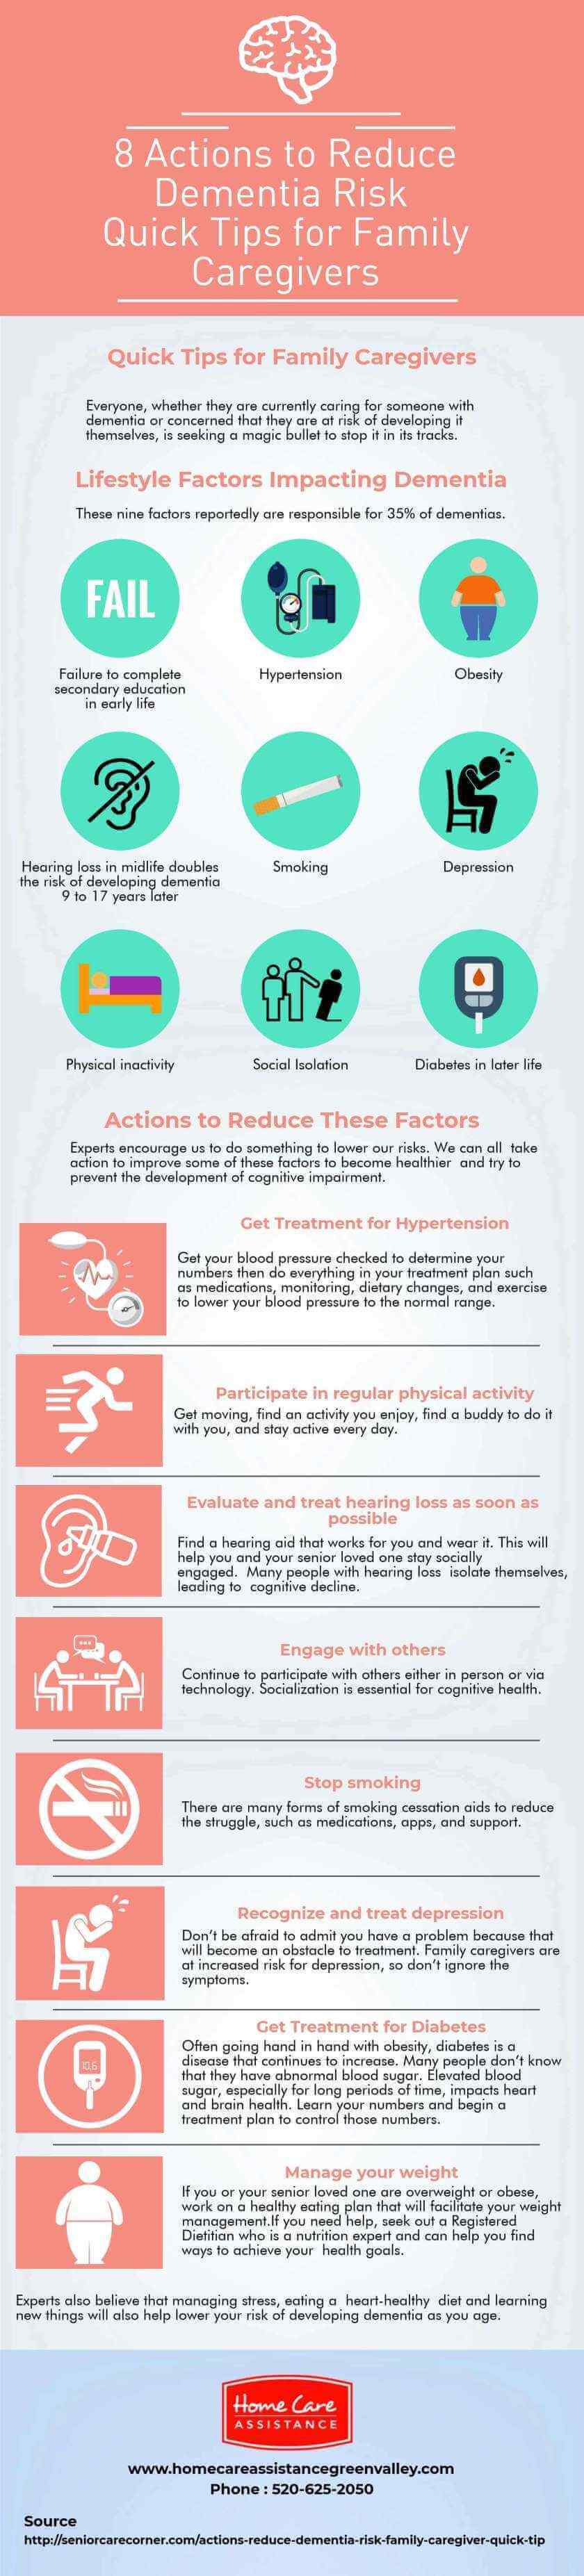 8 Ways to Reduce the Risk of Dementia [Infographic]